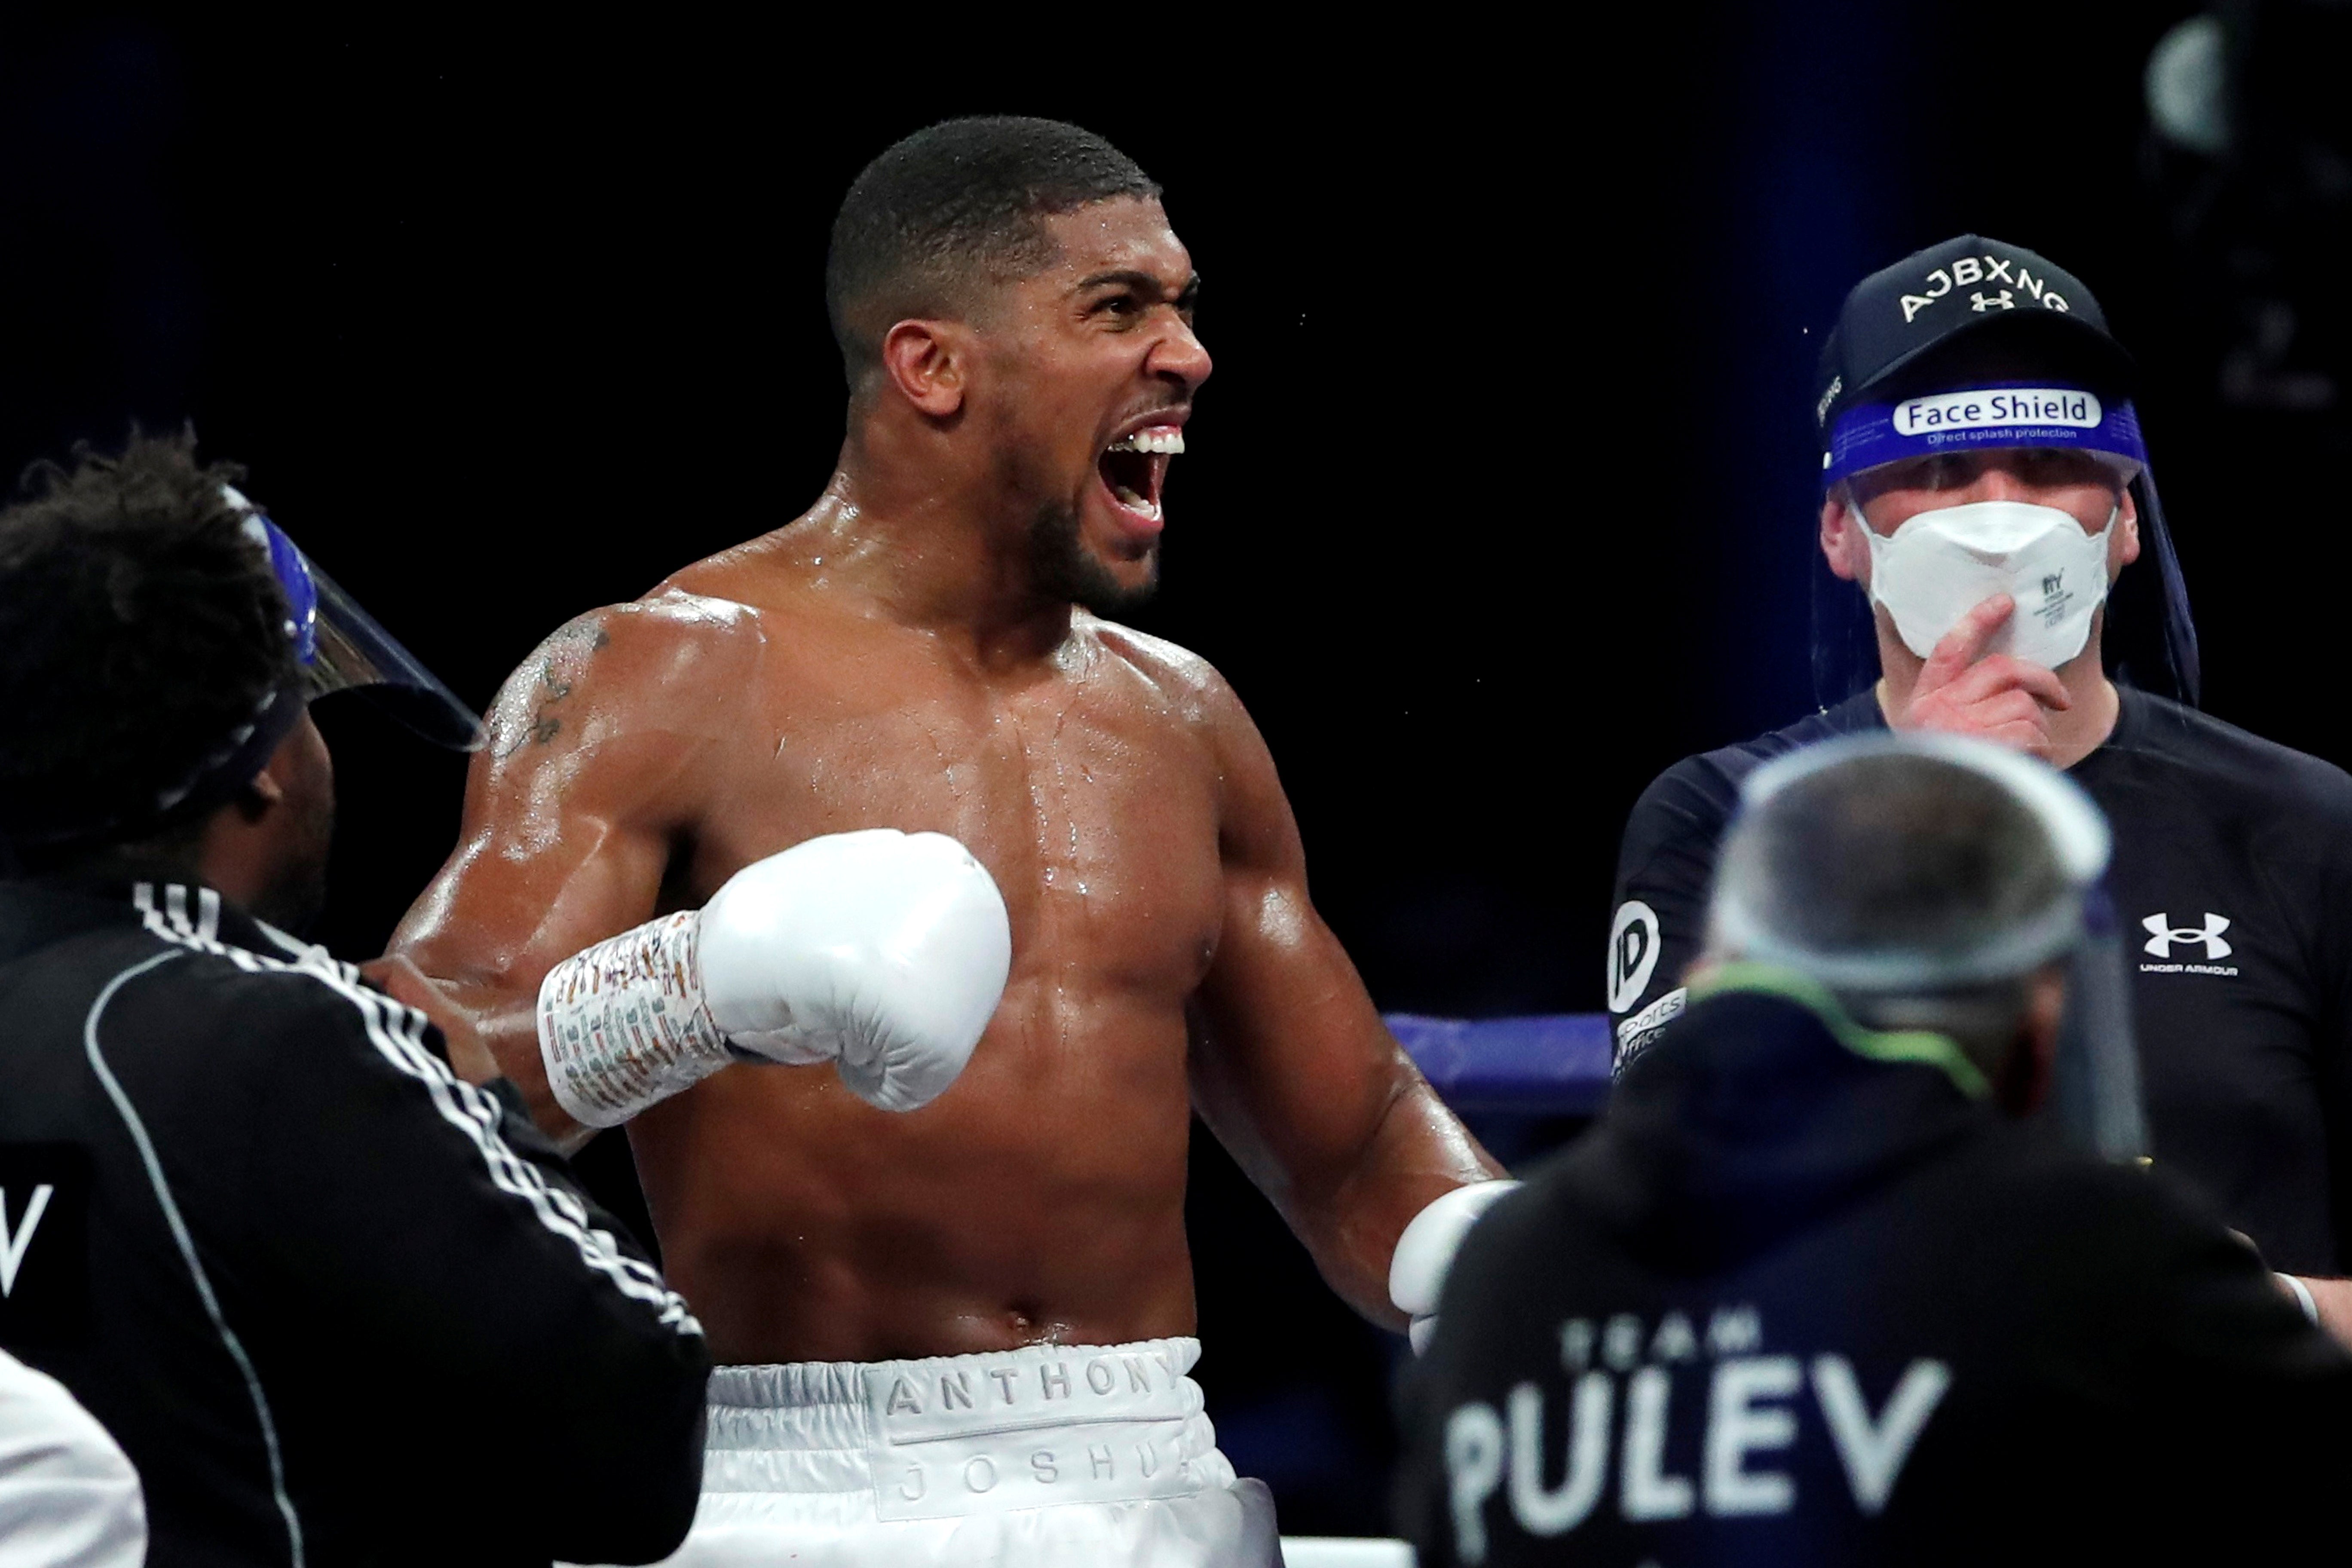 Anthony Joshua returned to action in front of 1,000 fans at Wembley Arena on Saturday